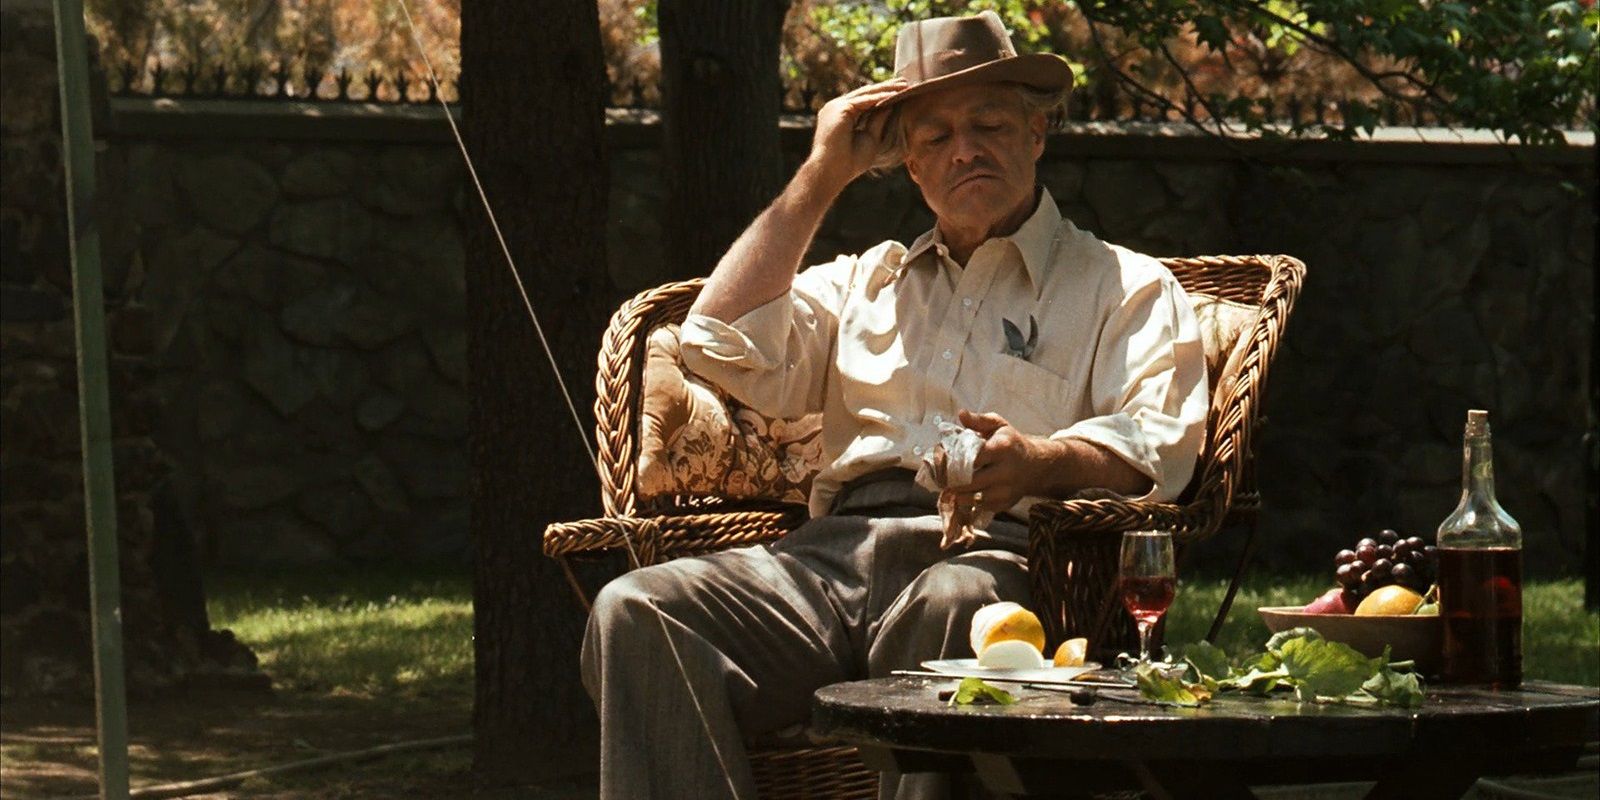 Vito sitting in a garden in The Godfather